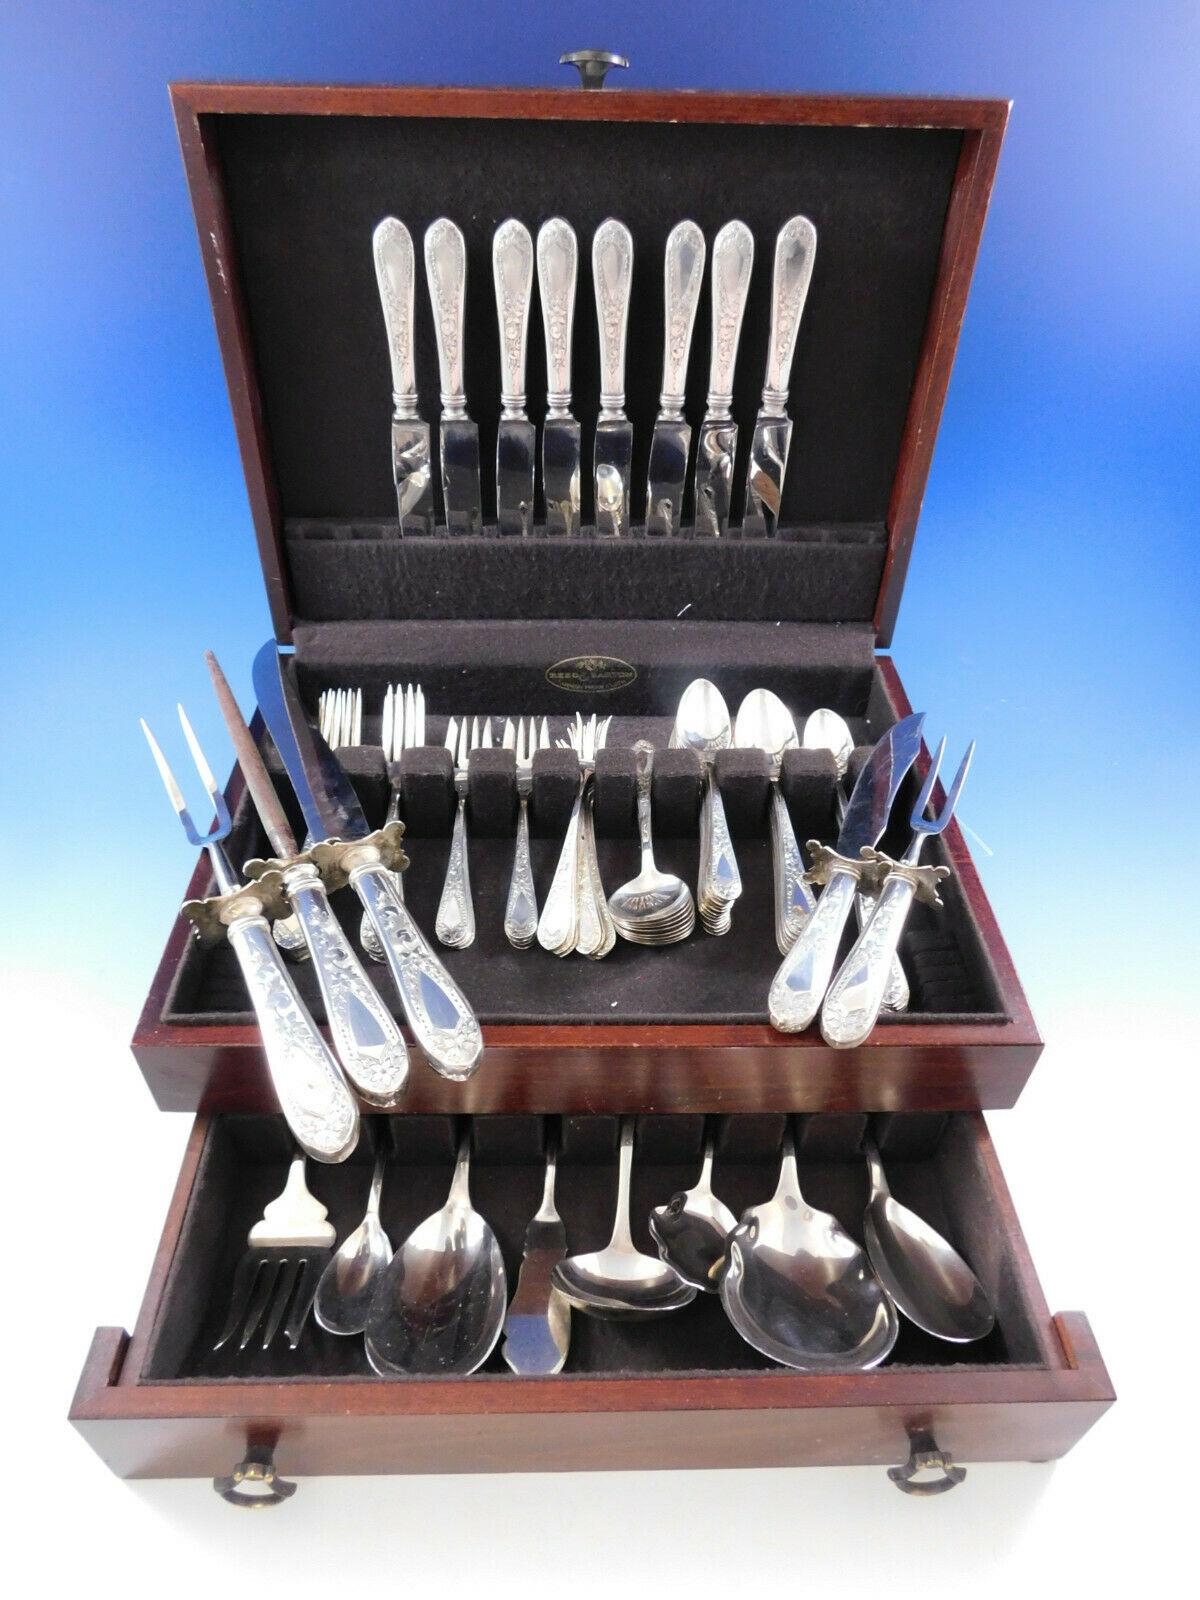 Betsy Patterson Engraved by Stieff circa 1932 sterling silver Flatware set, 77 pieces. This set includes:

8 knives, 9